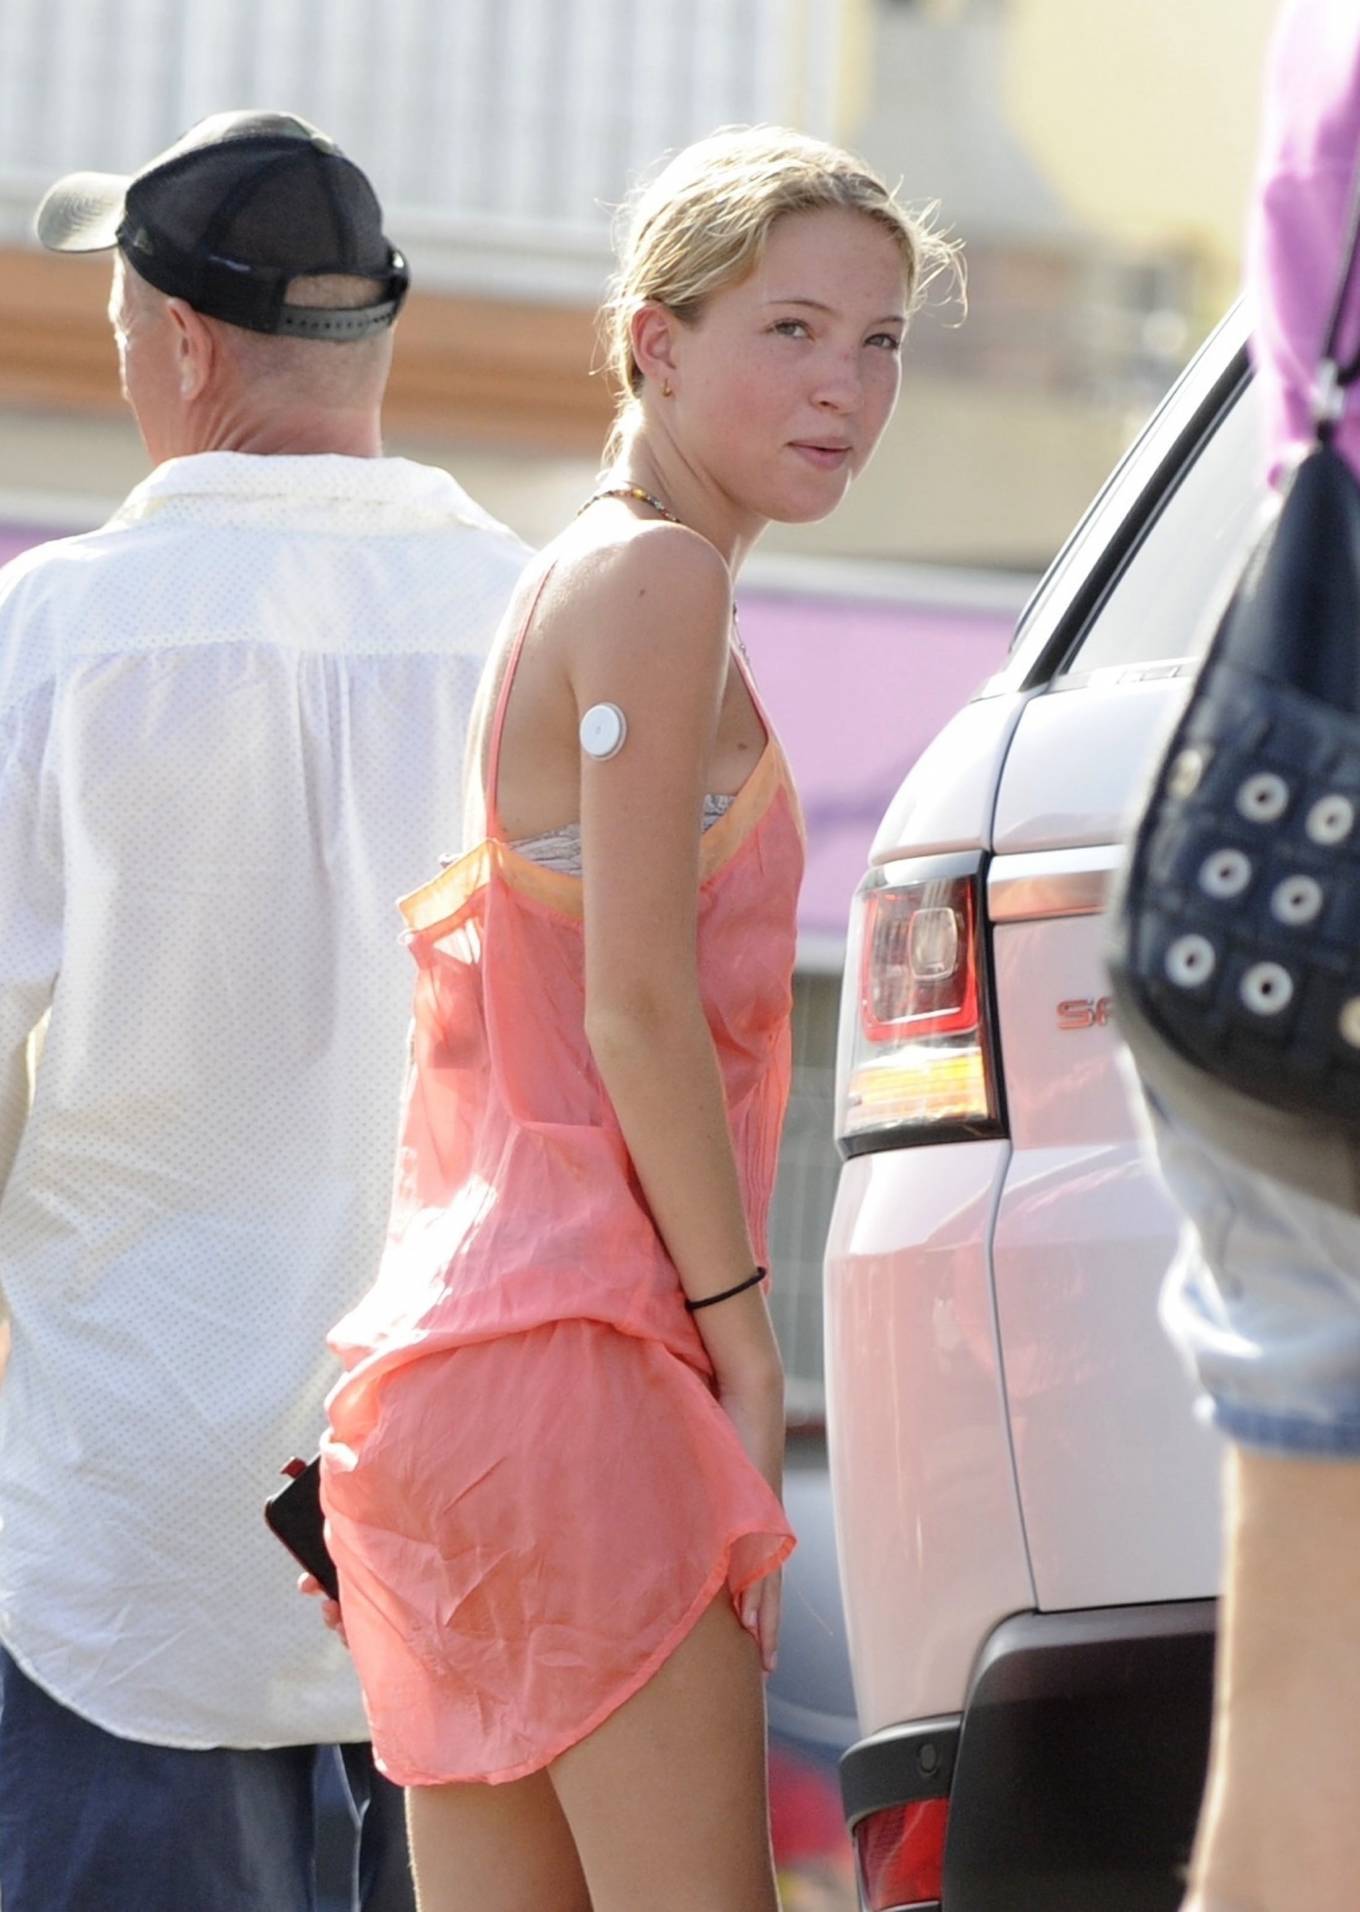 Kate Moss 2021 : Kate Moss - With her daughter Lila Grace Moss in the port ...